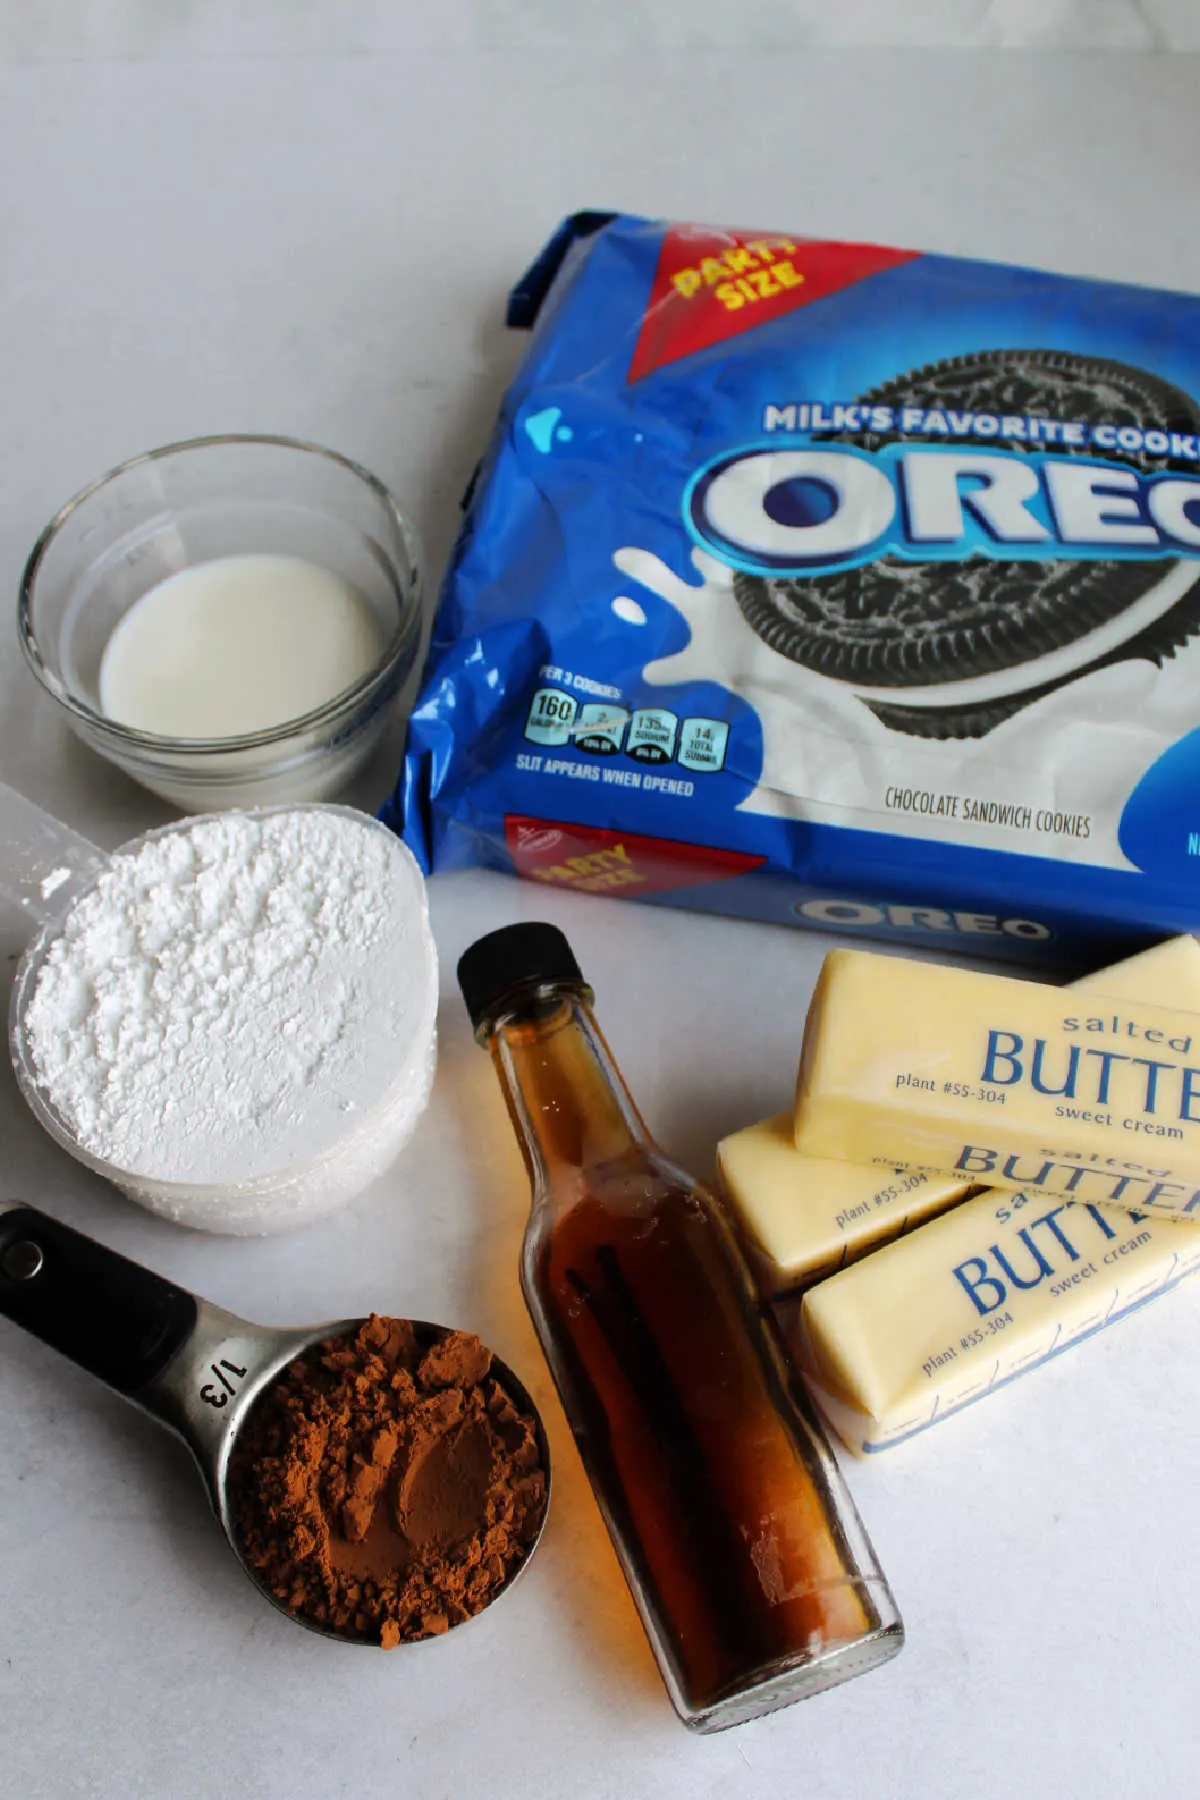 Ingredients including butter, powdered sugar, cocoa powder, vanilla, milk and Oreo cookies ready to be made into frosting.